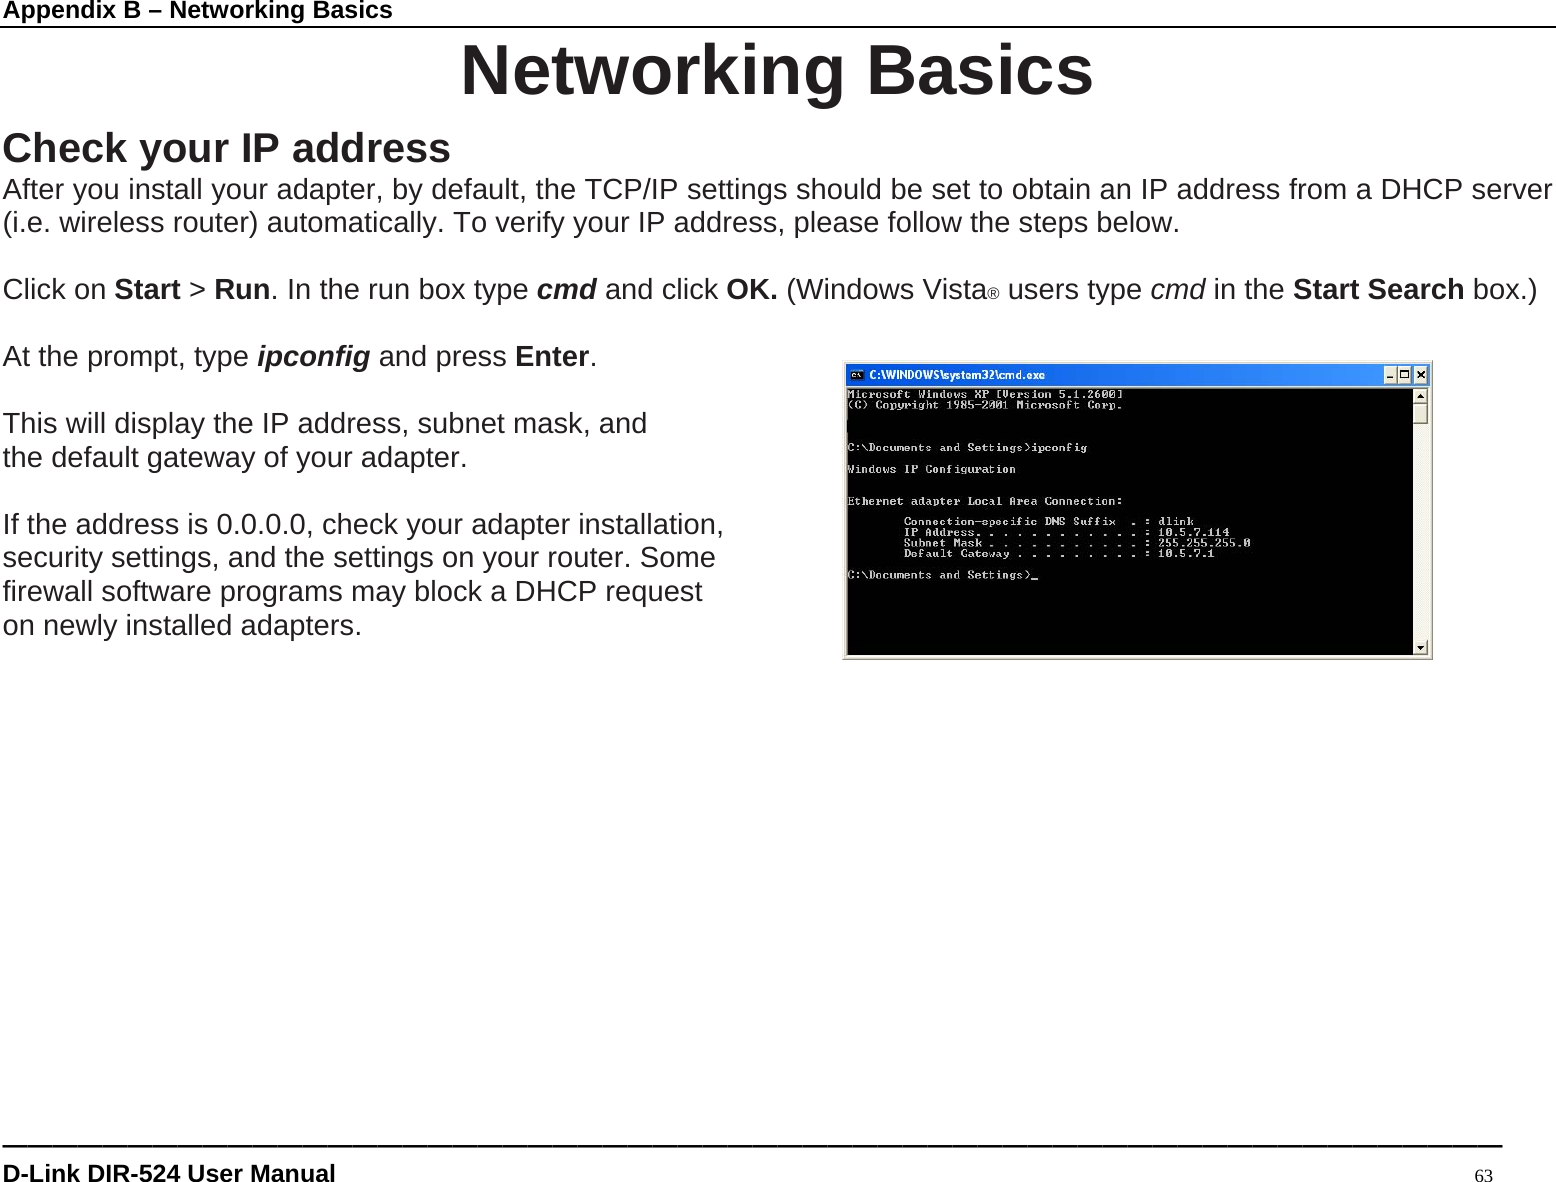 Appendix B – Networking Basics ———————————————————————————————————————————————————————————— D-Link DIR-524 User Manual                                                                                           63 Networking Basics Check your IP address After you install your adapter, by default, the TCP/IP settings should be set to obtain an IP address from a DHCP server (i.e. wireless router) automatically. To verify your IP address, please follow the steps below.  Click on Start &gt; Run. In the run box type cmd and click OK. (Windows Vista® users type cmd in the Start Search box.)  At the prompt, type ipconfig and press Enter.  This will display the IP address, subnet mask, and the default gateway of your adapter.  If the address is 0.0.0.0, check your adapter installation,   security settings, and the settings on your router. Some   firewall software programs may block a DHCP request   on newly installed adapters.                 